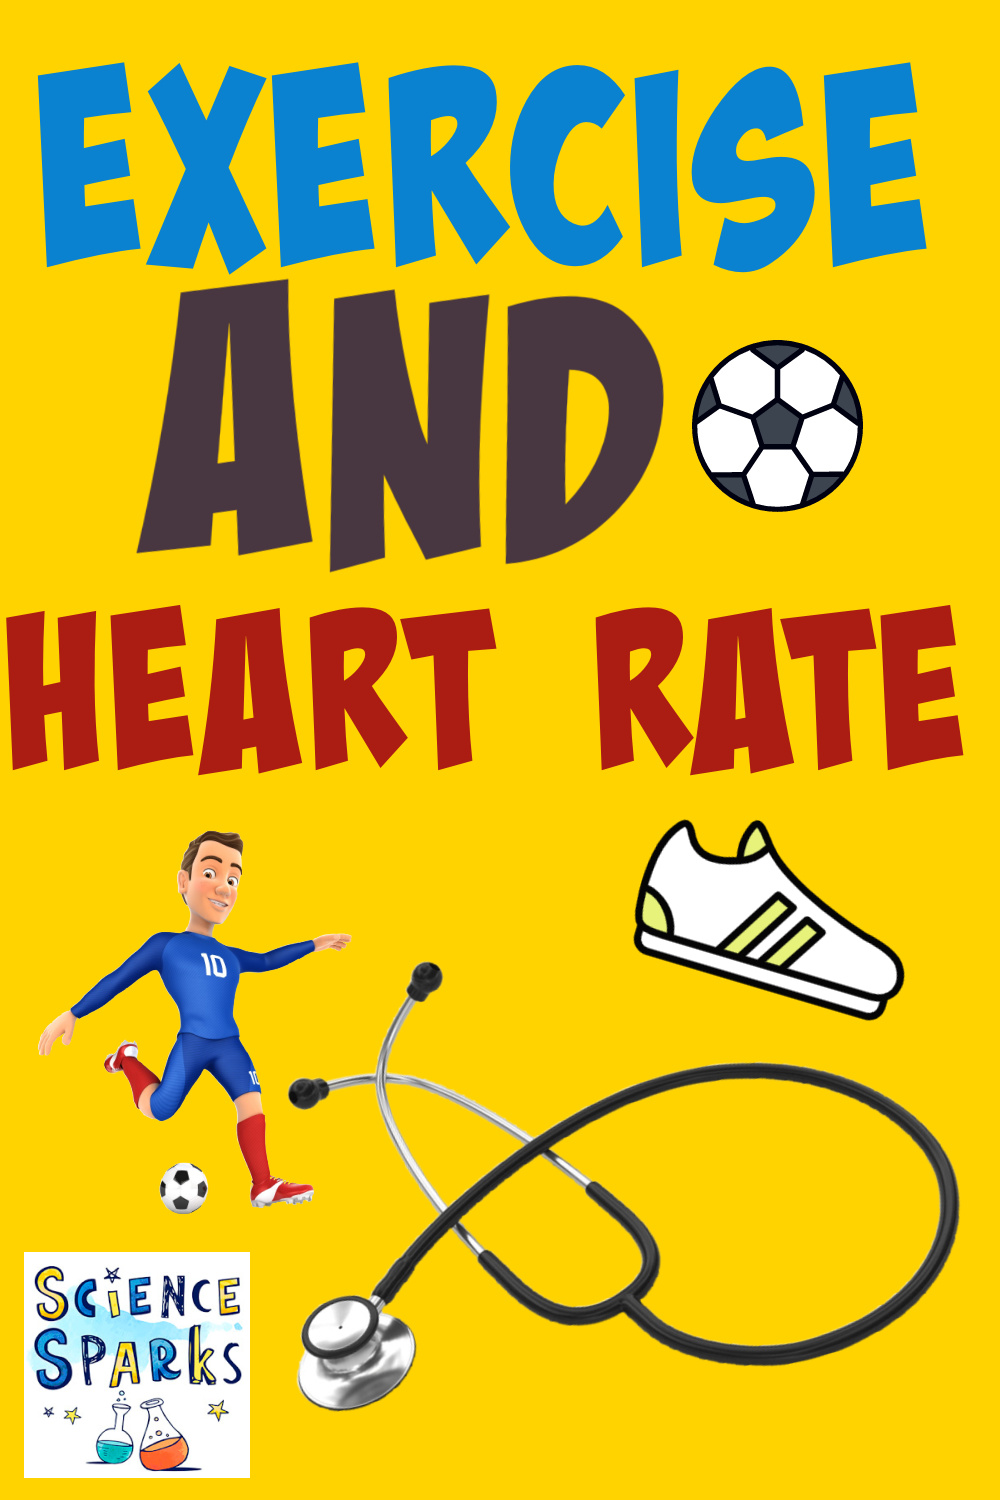 Cartoon image of a person, football and stethoscope